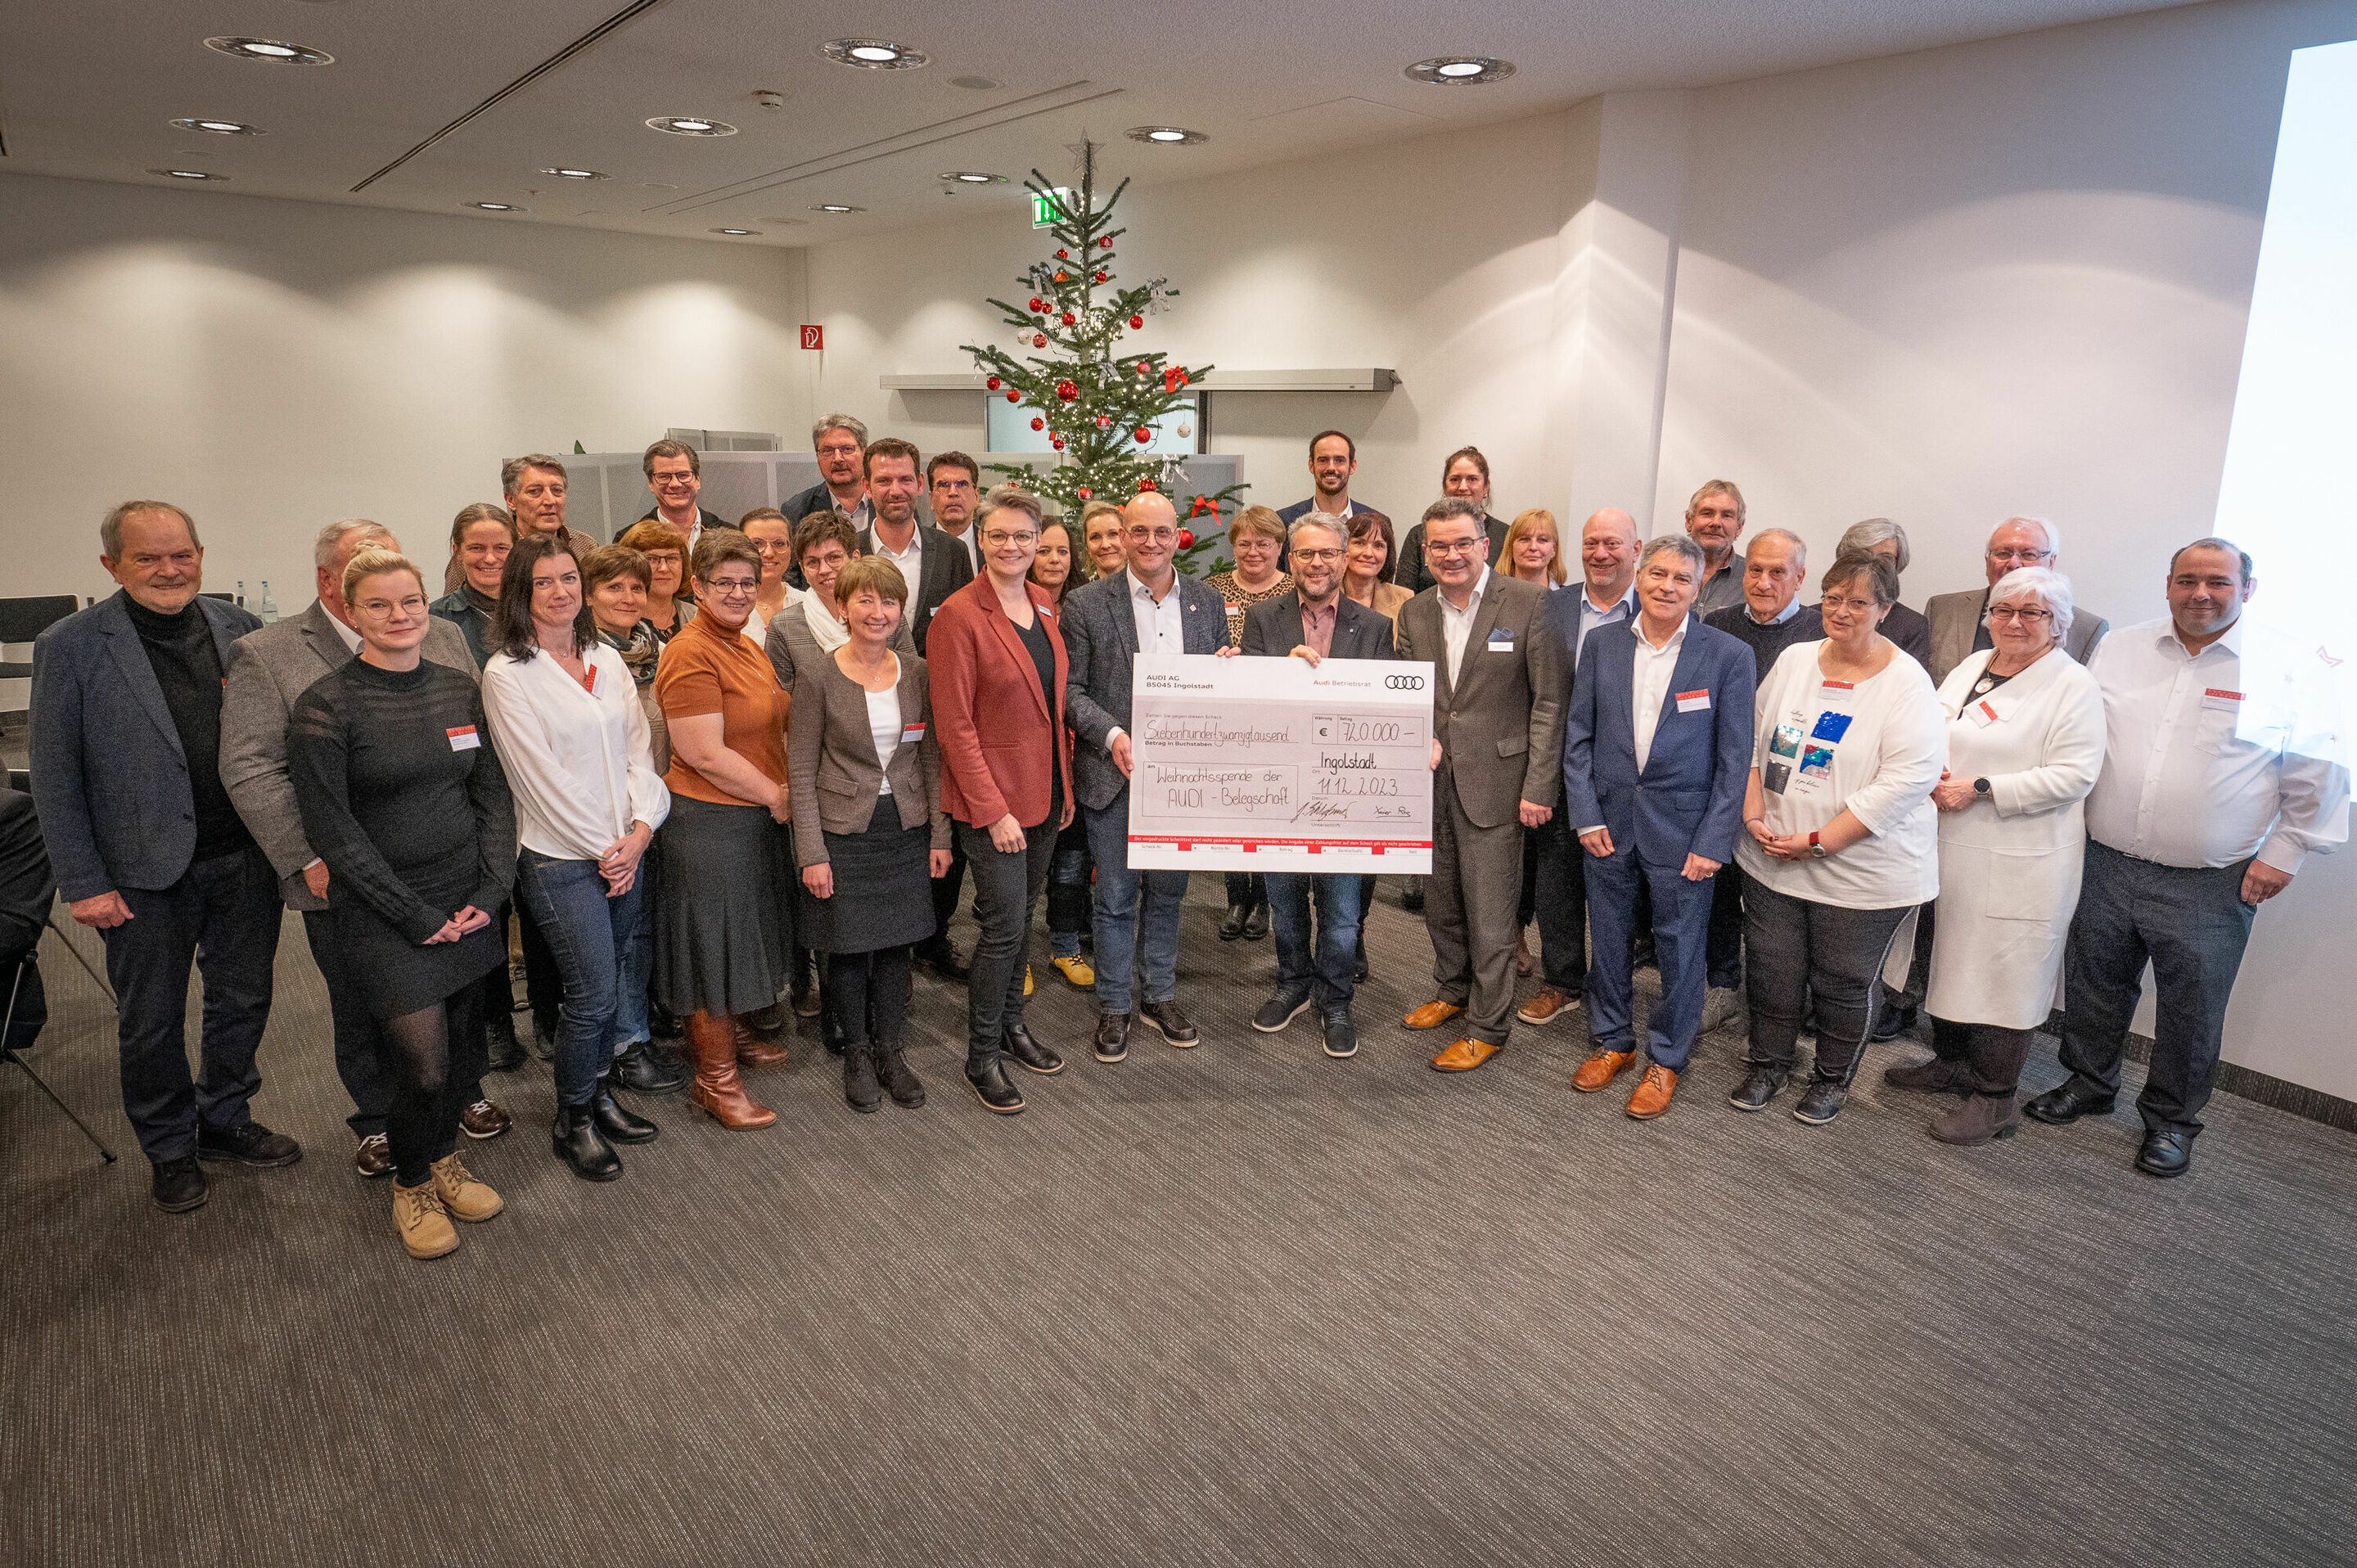 Christmas donation: Audi employees support regional organizations with 720,000 euros